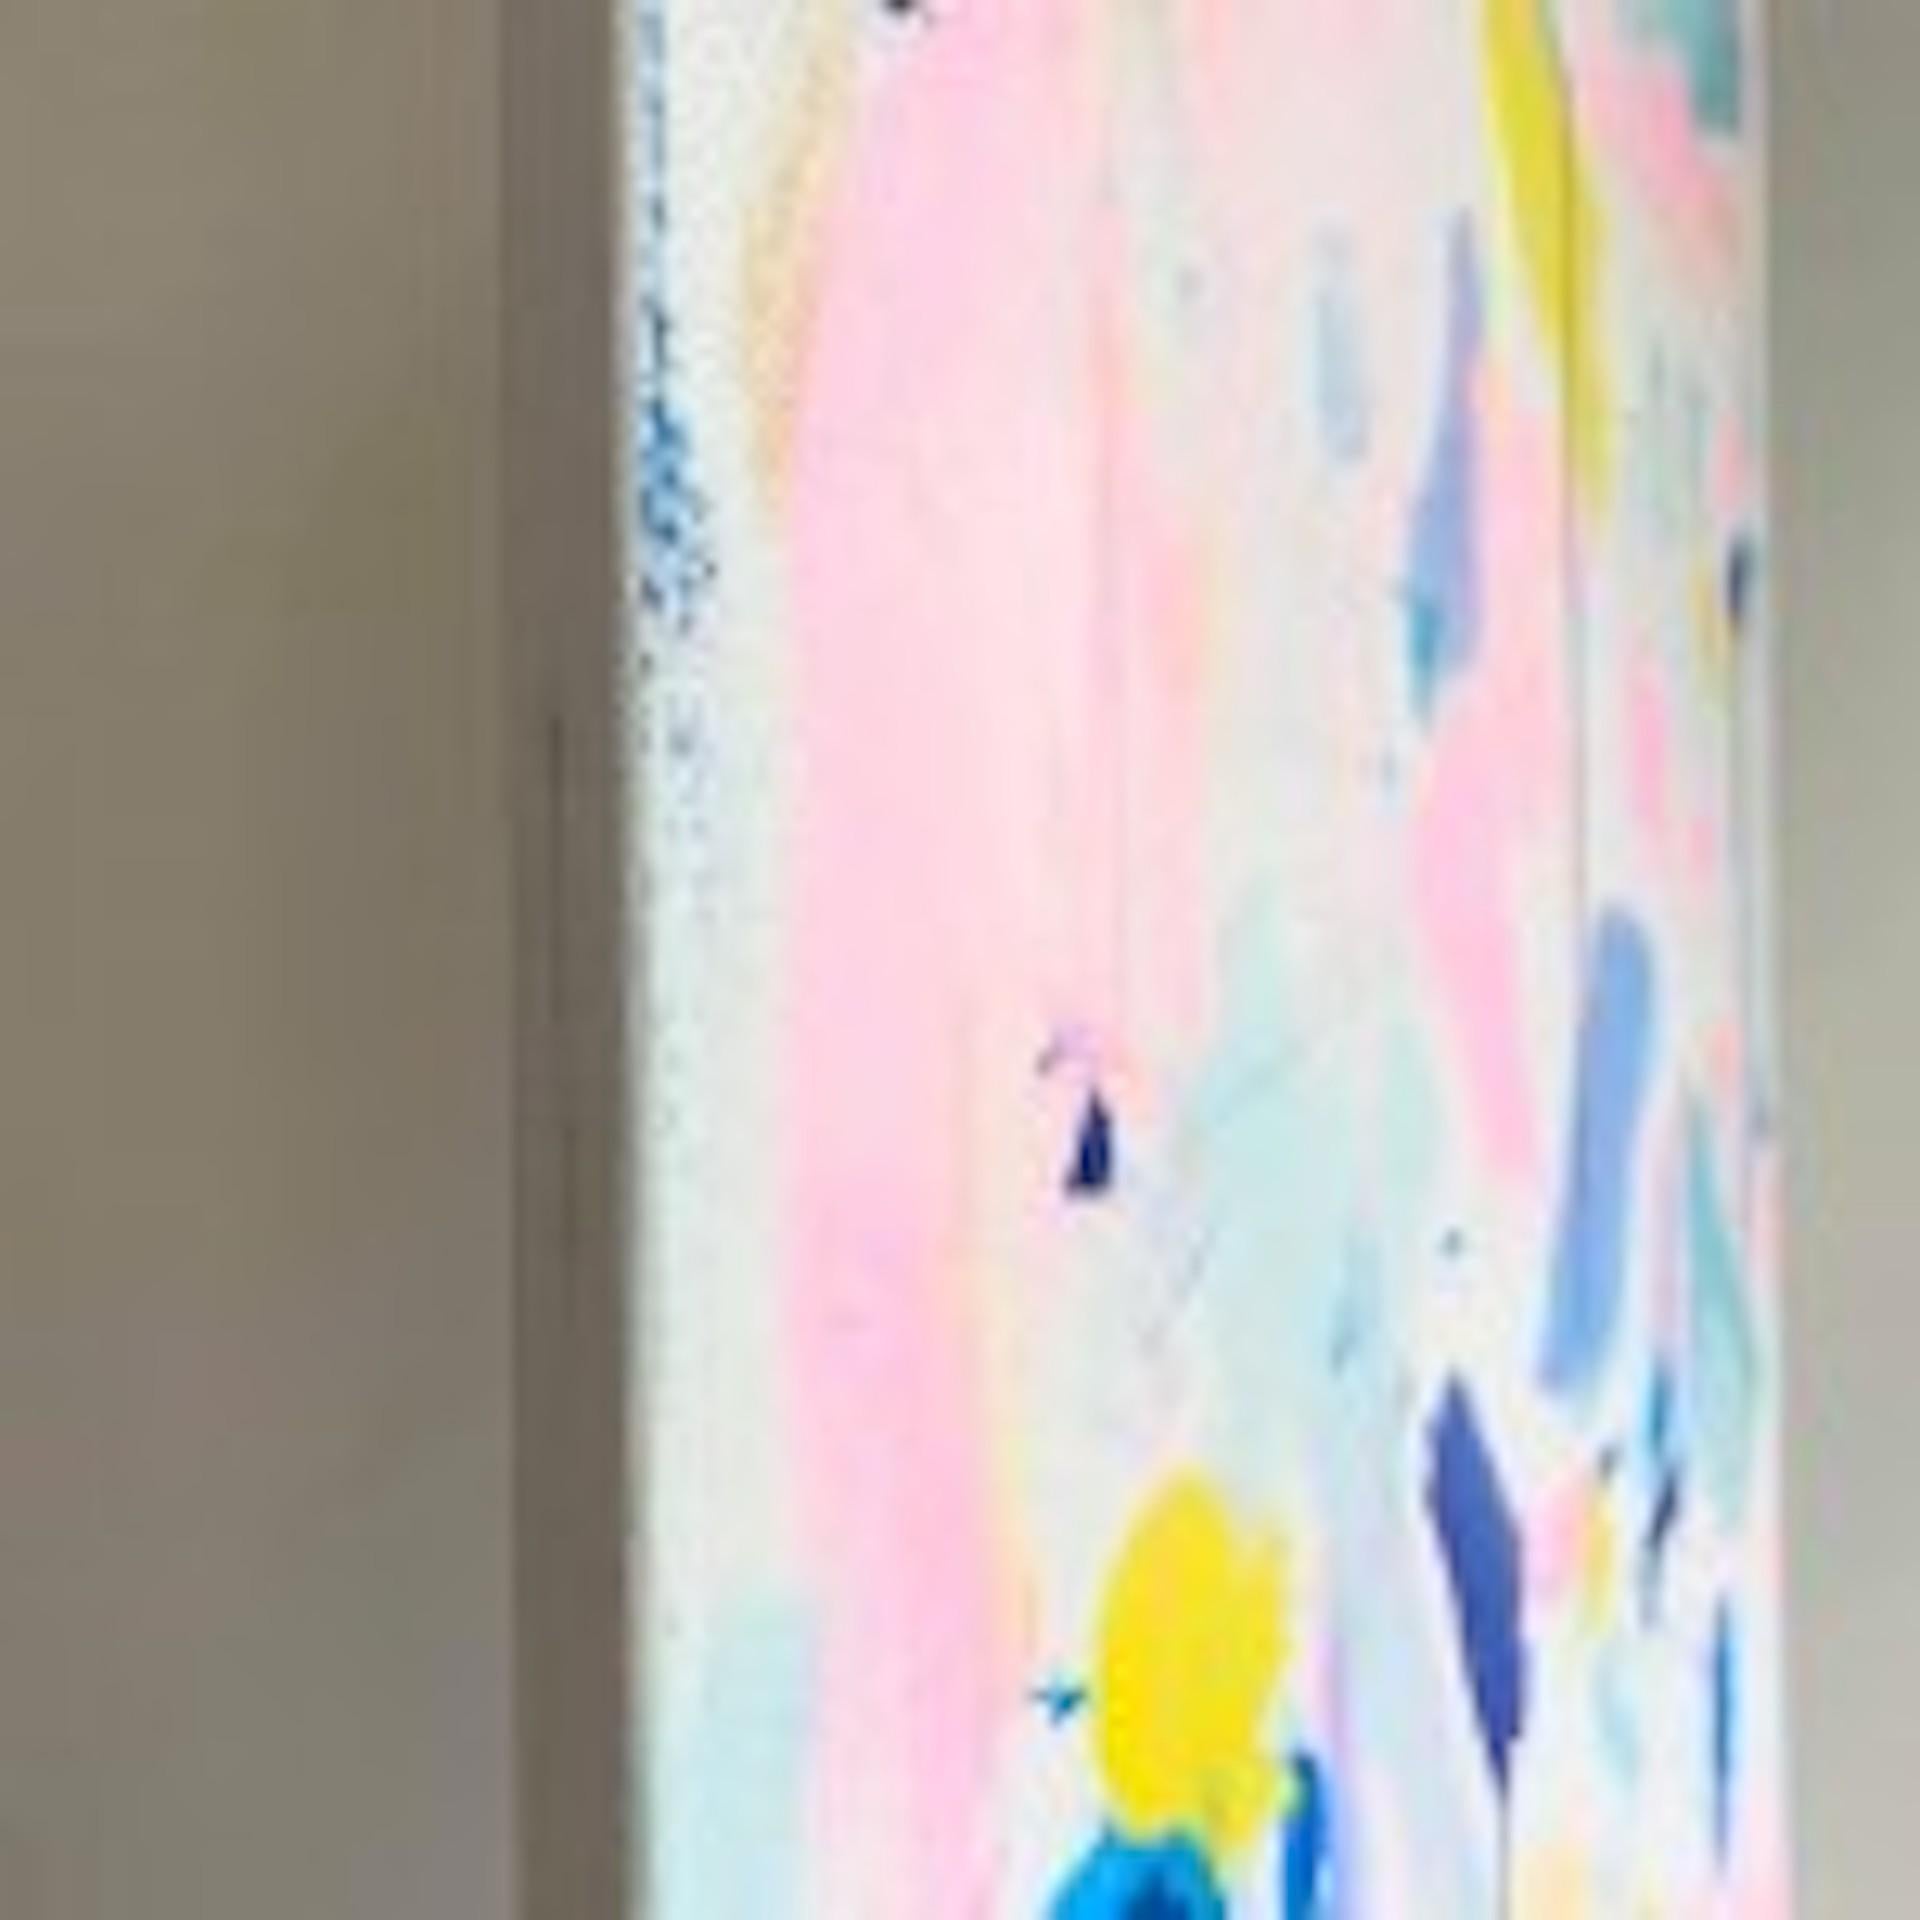 Rebecca Newport
Forever Yours
Contemporary Abstract Painting
Acrylic on canvas
Canvas Size H 80cm x W 60cm x D 1.5cm
Sold unframed.
Please note that insitu images are purely an indication of how a piece may look.

‘Forever Yours’ is an original